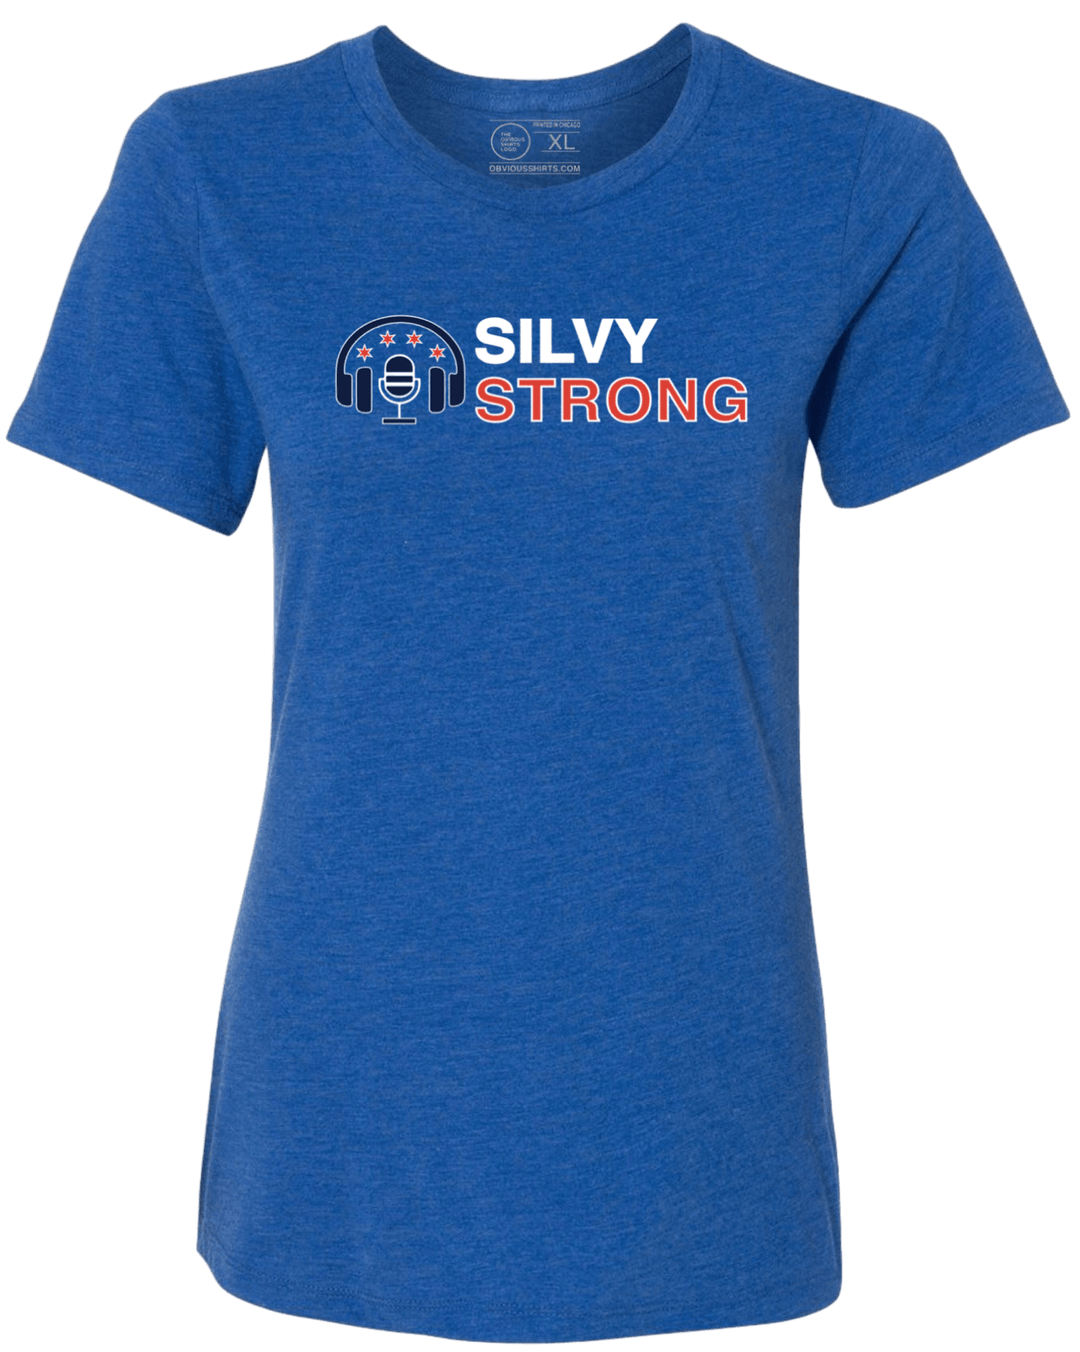 SILVY STRONG (WOMEN'S CREW) - OBVIOUS SHIRTS.